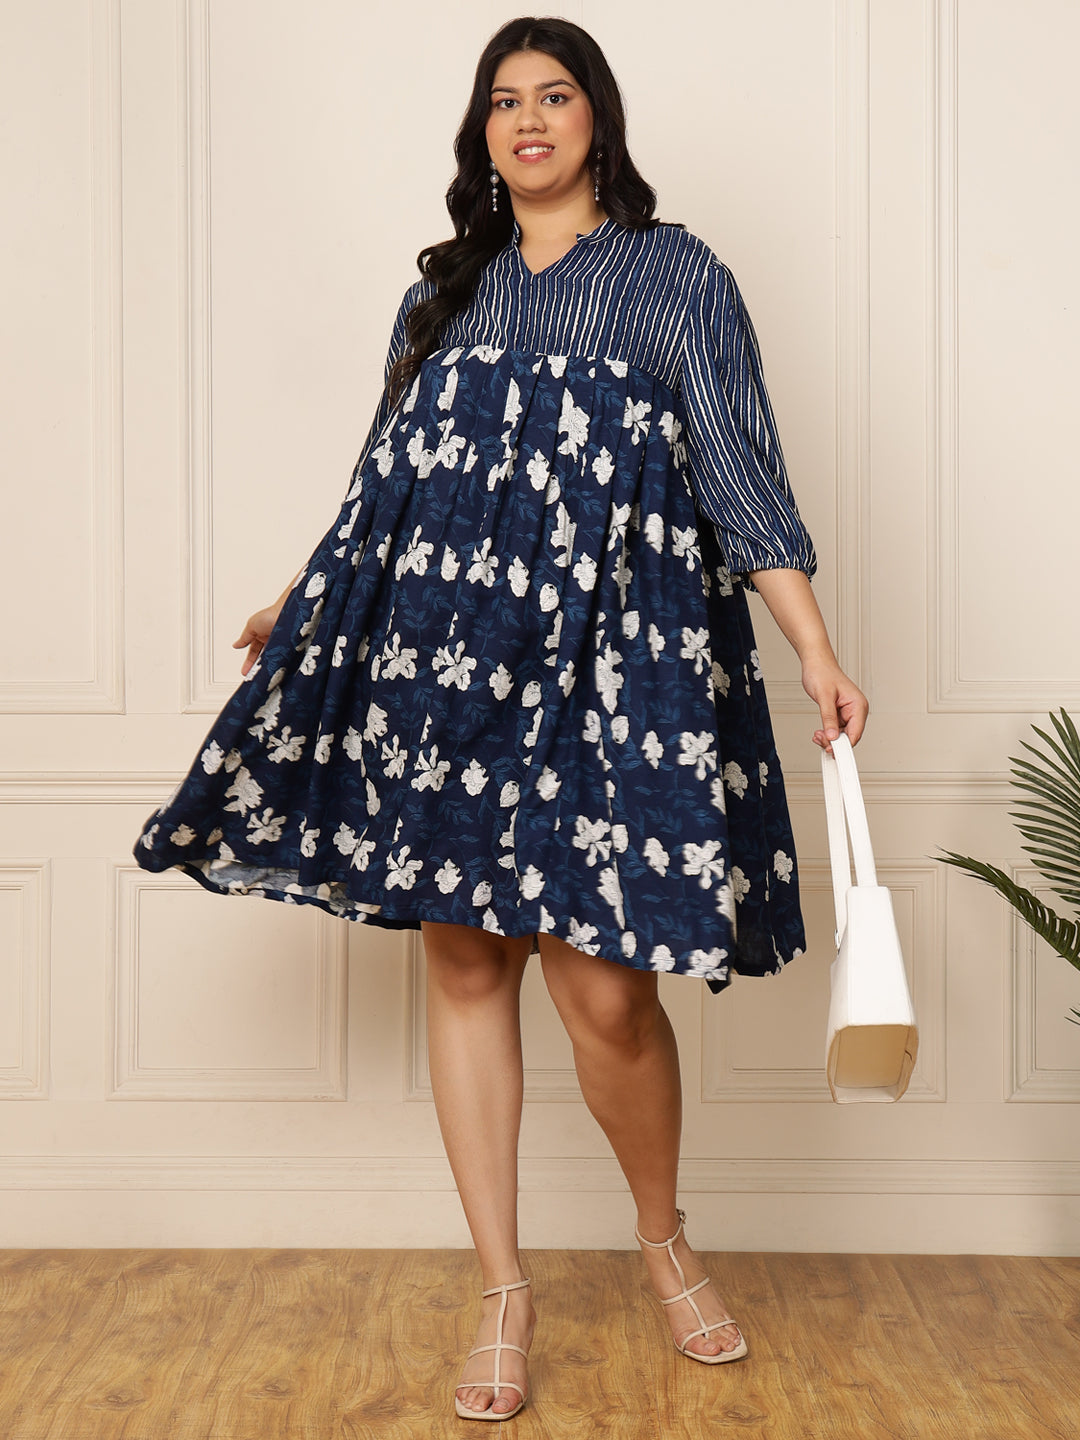 Women's Plus Size Blue Striped with Floral Printed Knee Length Dress